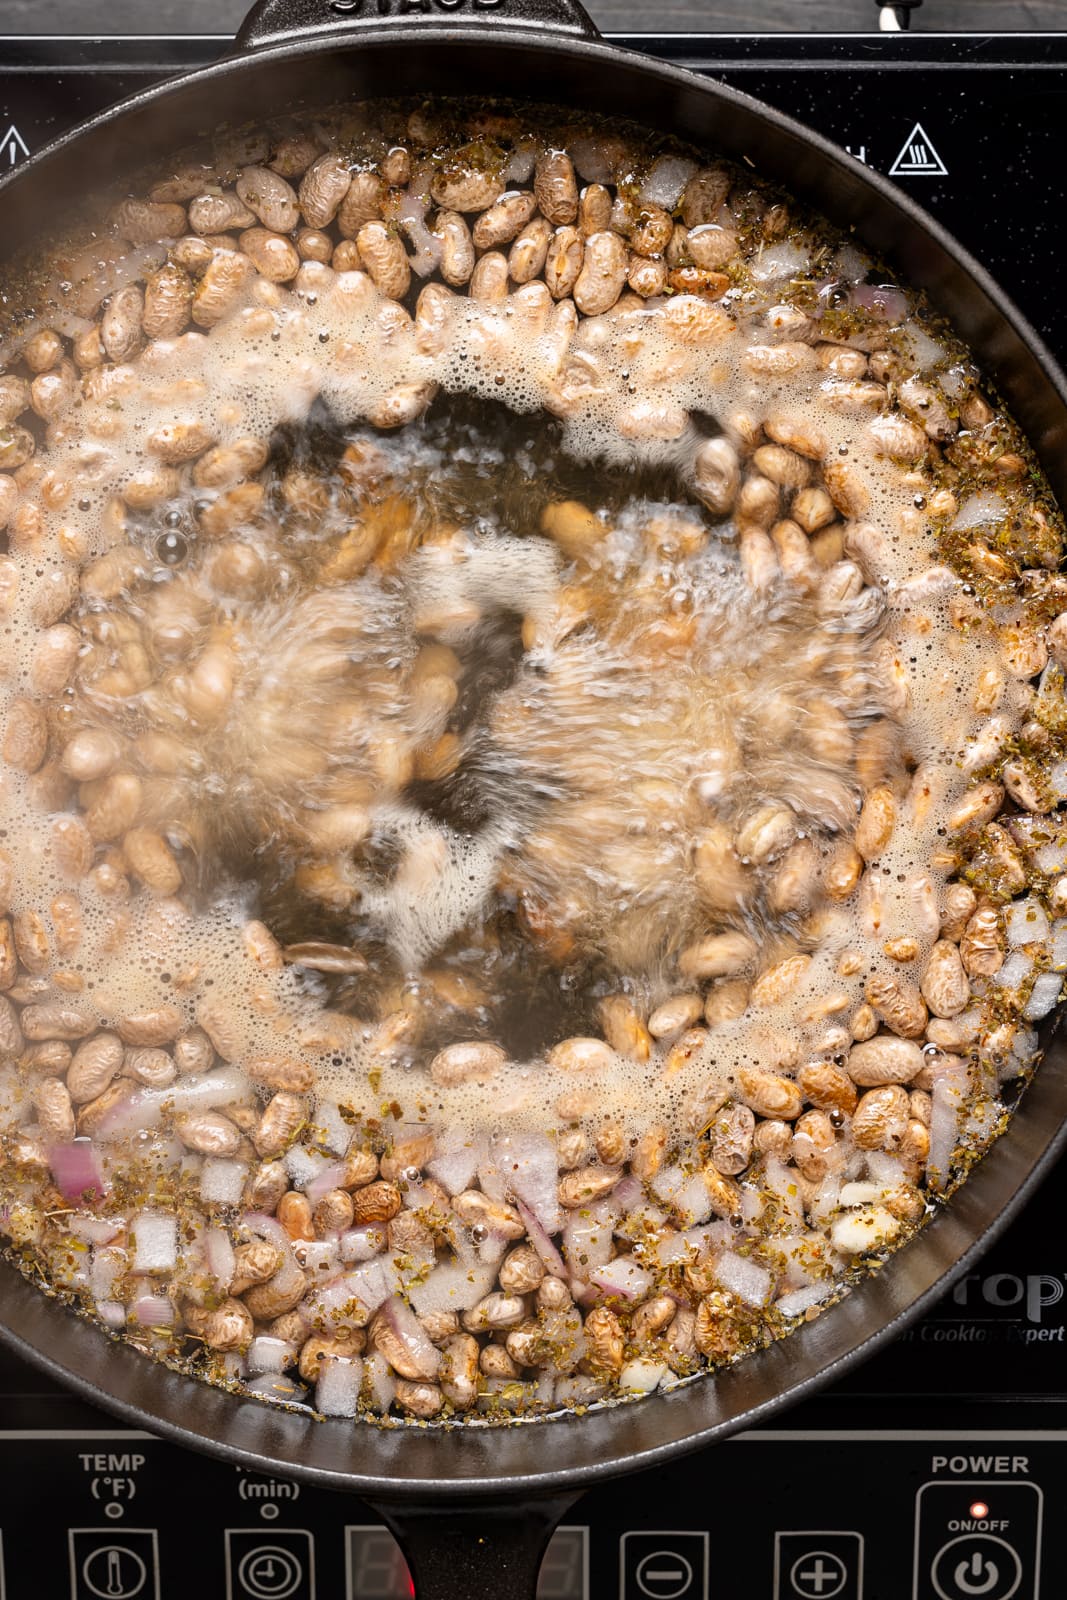 Pinto beans being boiled in a pot.